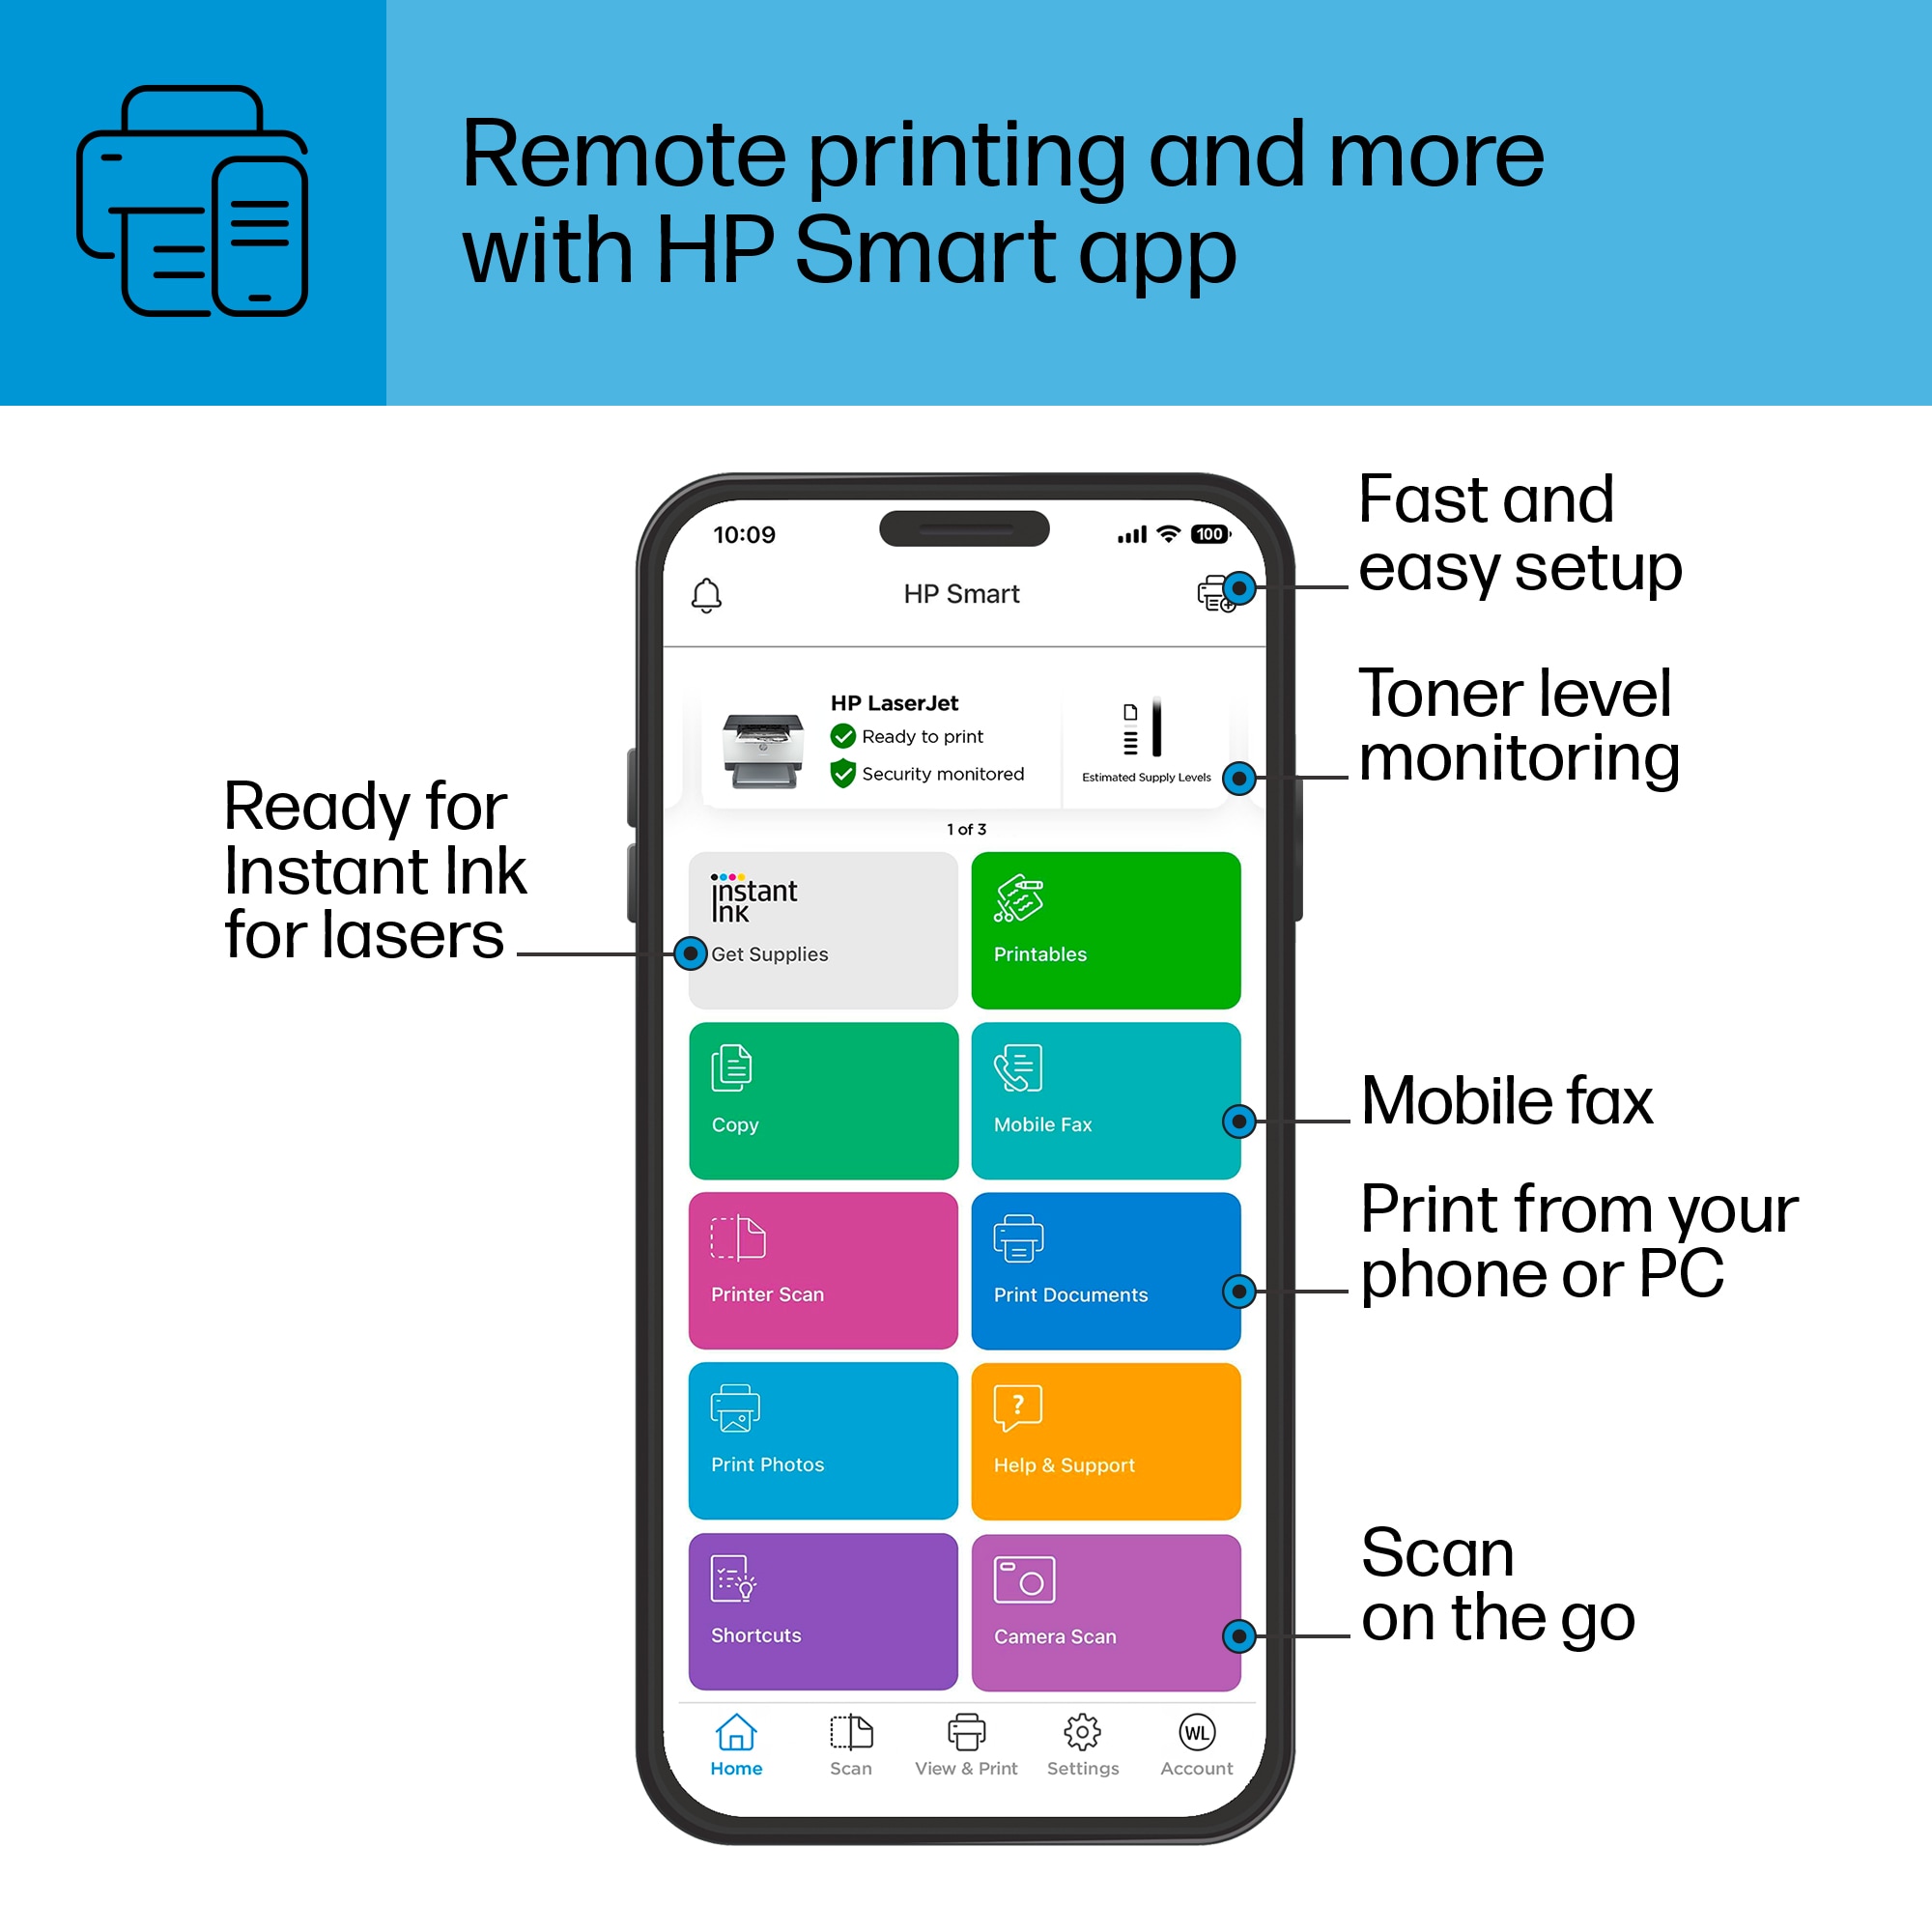 Remote printing and more with HP Smart app